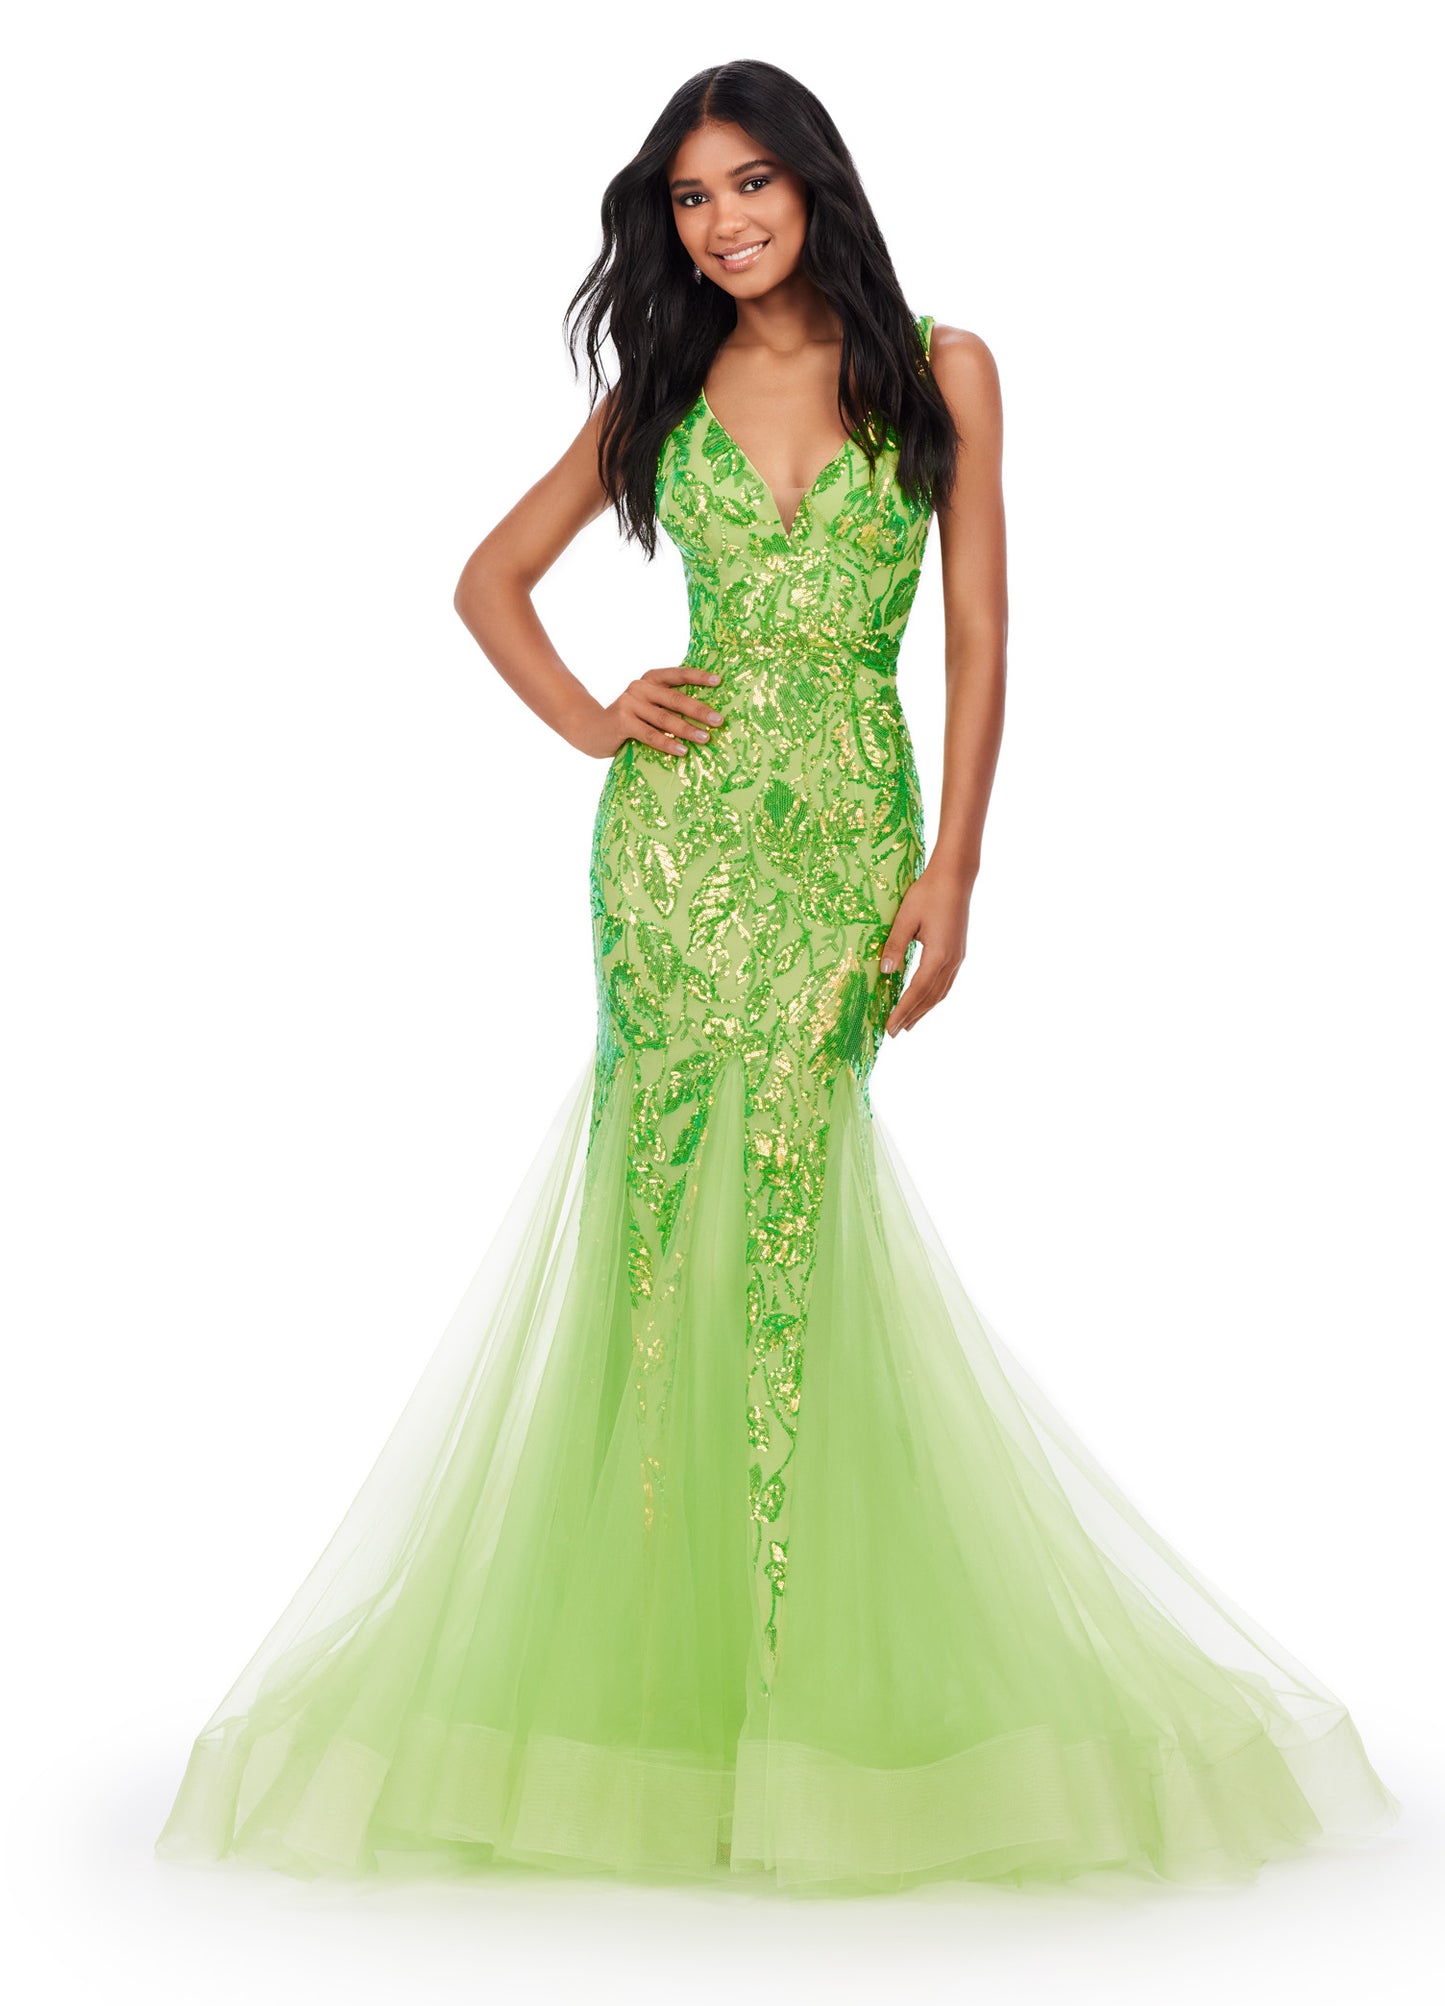 Get ready to command attention in the Ashley Lauren 11472 Long Prom Dress. With a stunning V-neck, sequin embellishments, and a mermaid skirt made with stretchy fabric, this gown is designed to enhance your figure and make you shine. Perfect for formal events, pageants, and more. Can you say iconic? This stretch sequin gown features a v-neckline and a pleated tulle skirt to help you slay your next event.